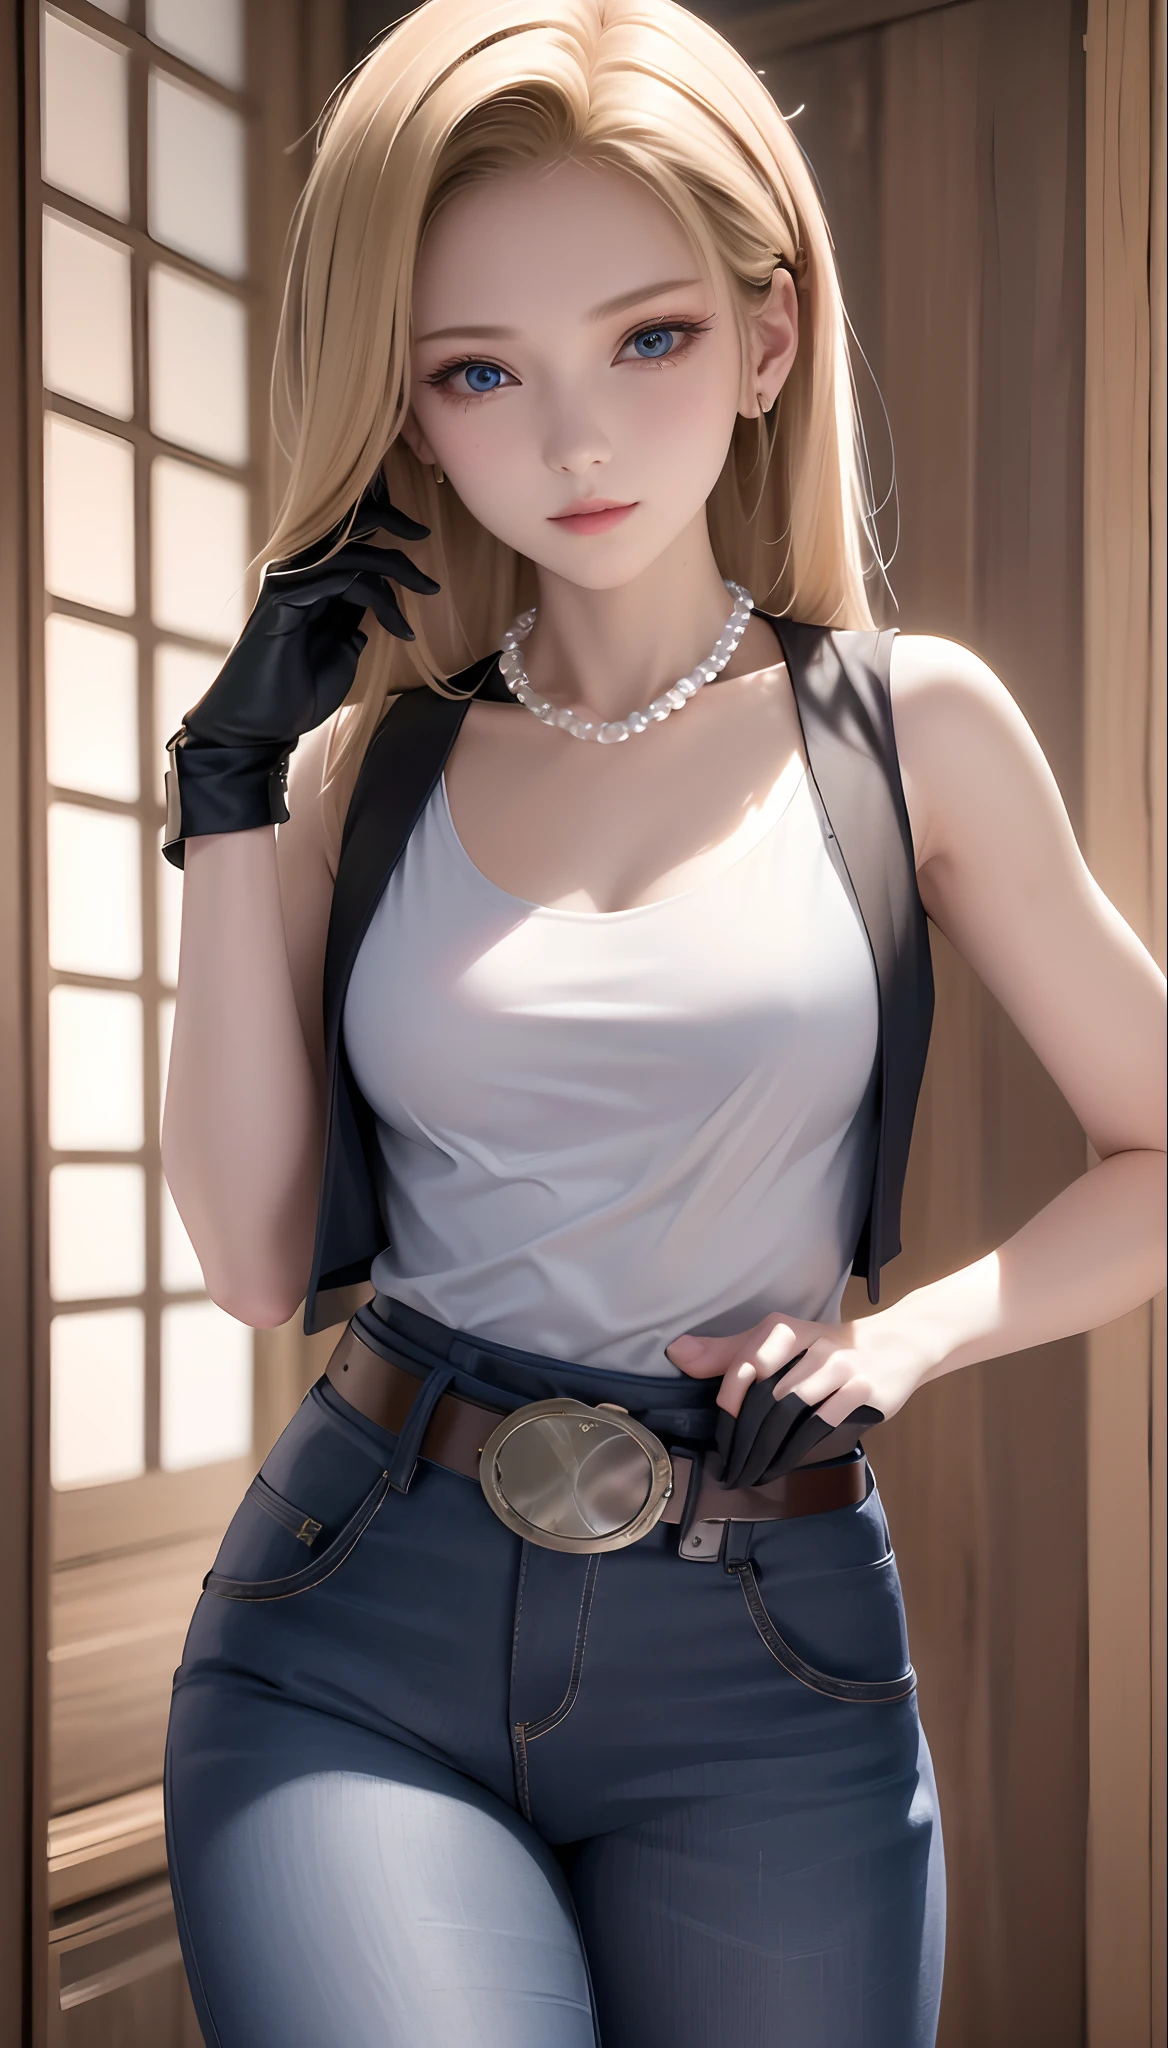 8K、Actual image、intricate detailes、Ultra-detail、(Photorealsitic)、
and18, 1girl, android 18, blonde  hair, blue eyess, a belt, GENDER, pearl_necklace, A bracelet, black gloves, white  shirt, length hair, shortsleeves, earrings, Blue pants, open vest, Black vest,
Placid、signature